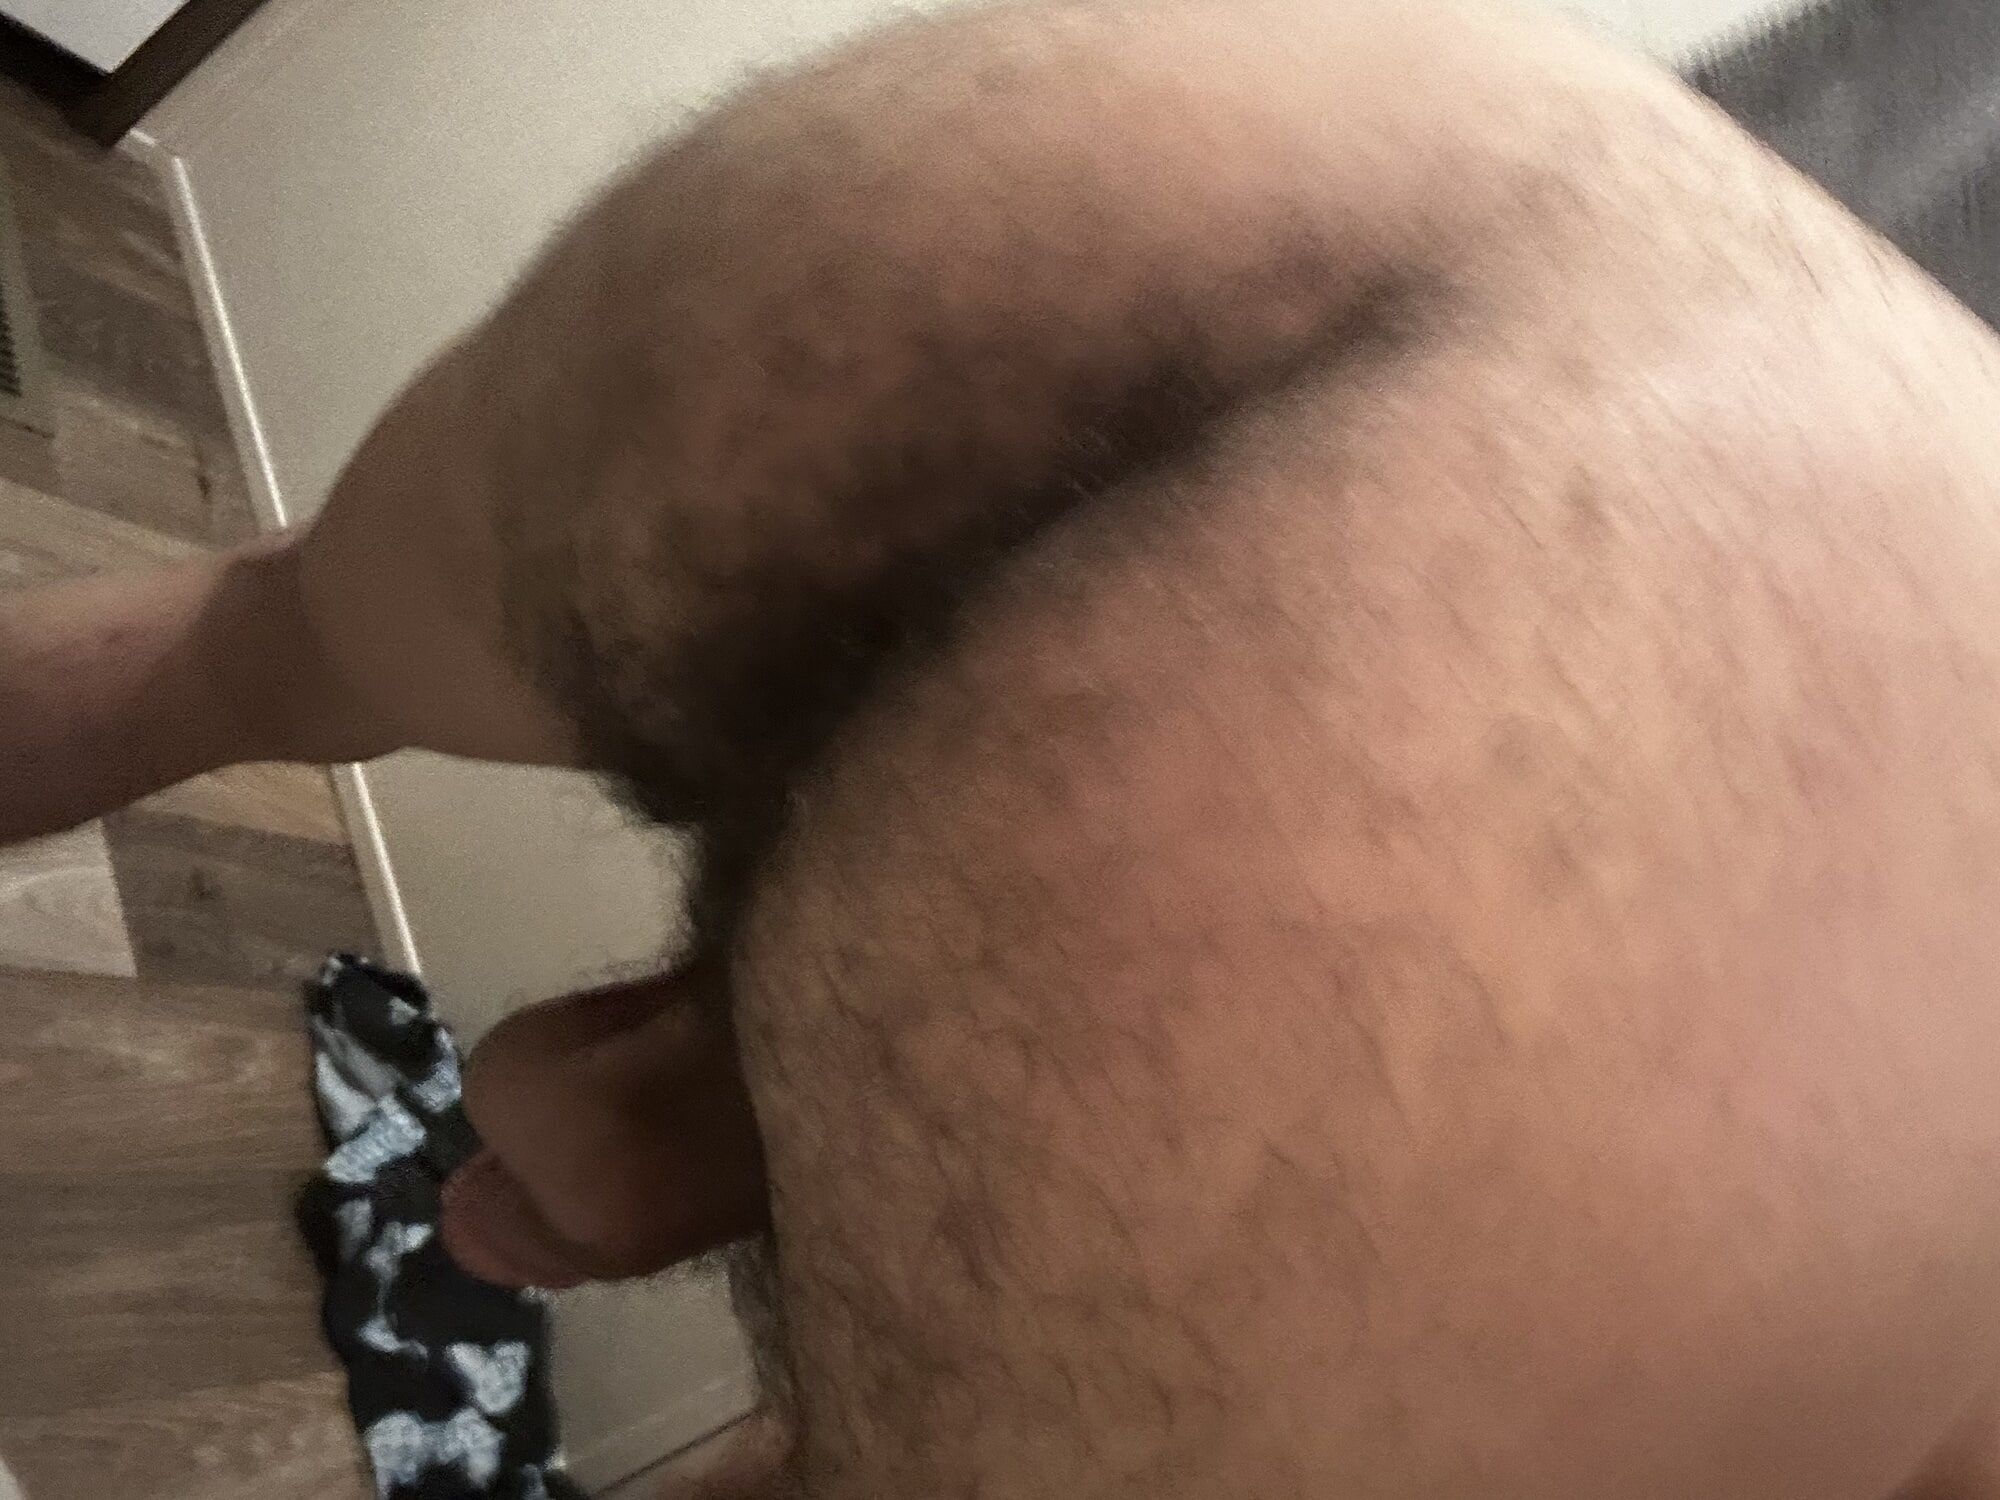 Big Fat Hairy Virgin Ass Ready to be Smacked and eaten #3